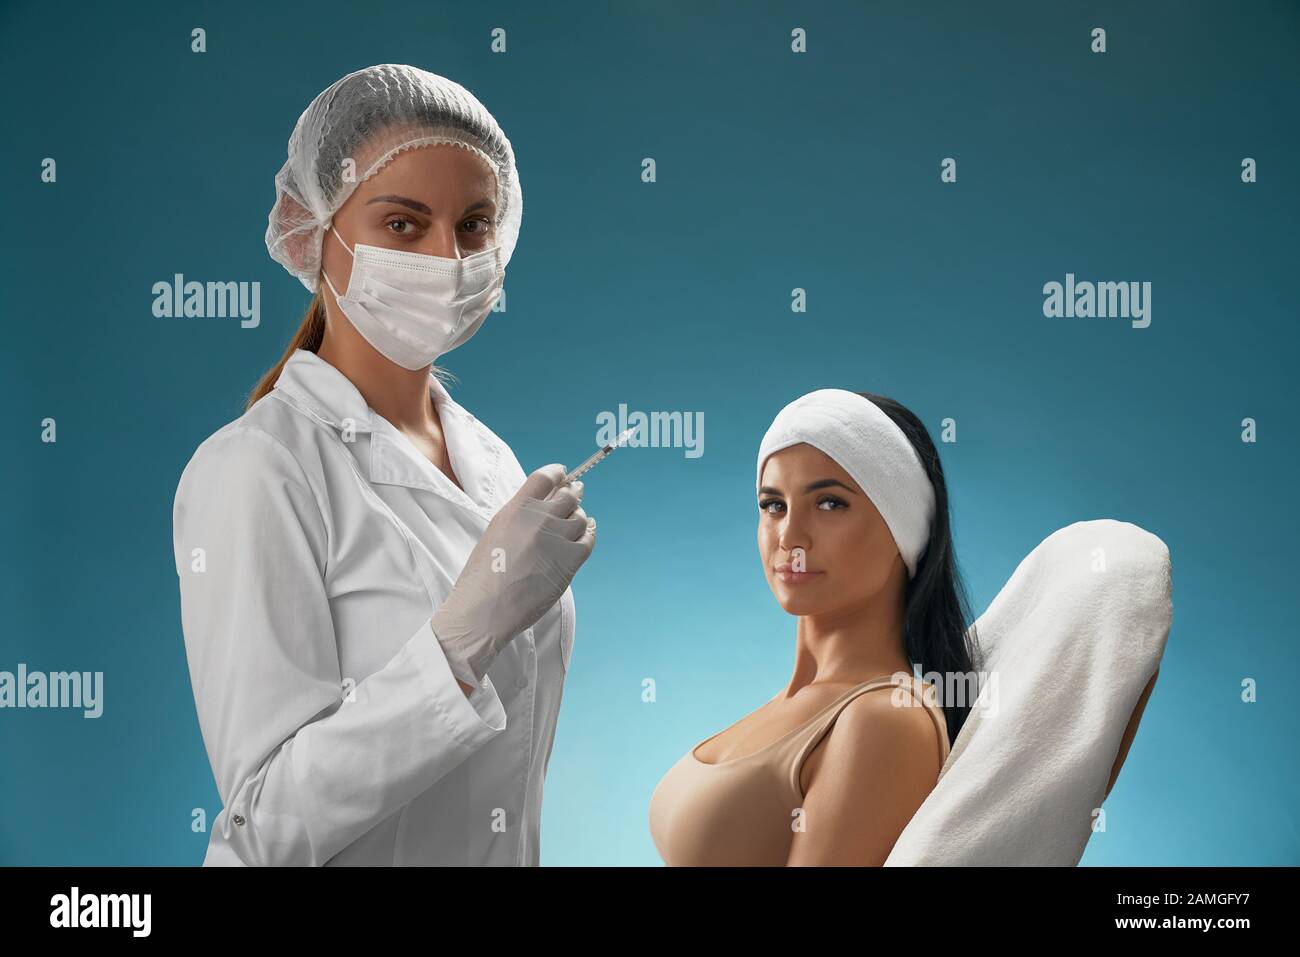 Side view of female cosmetologist in mask and coat holding syringe. Brunette woman patient with towel on head sitting in chair, smiling, looking at camera, isolated on blue. Concept of cosmetology. Stock Photo